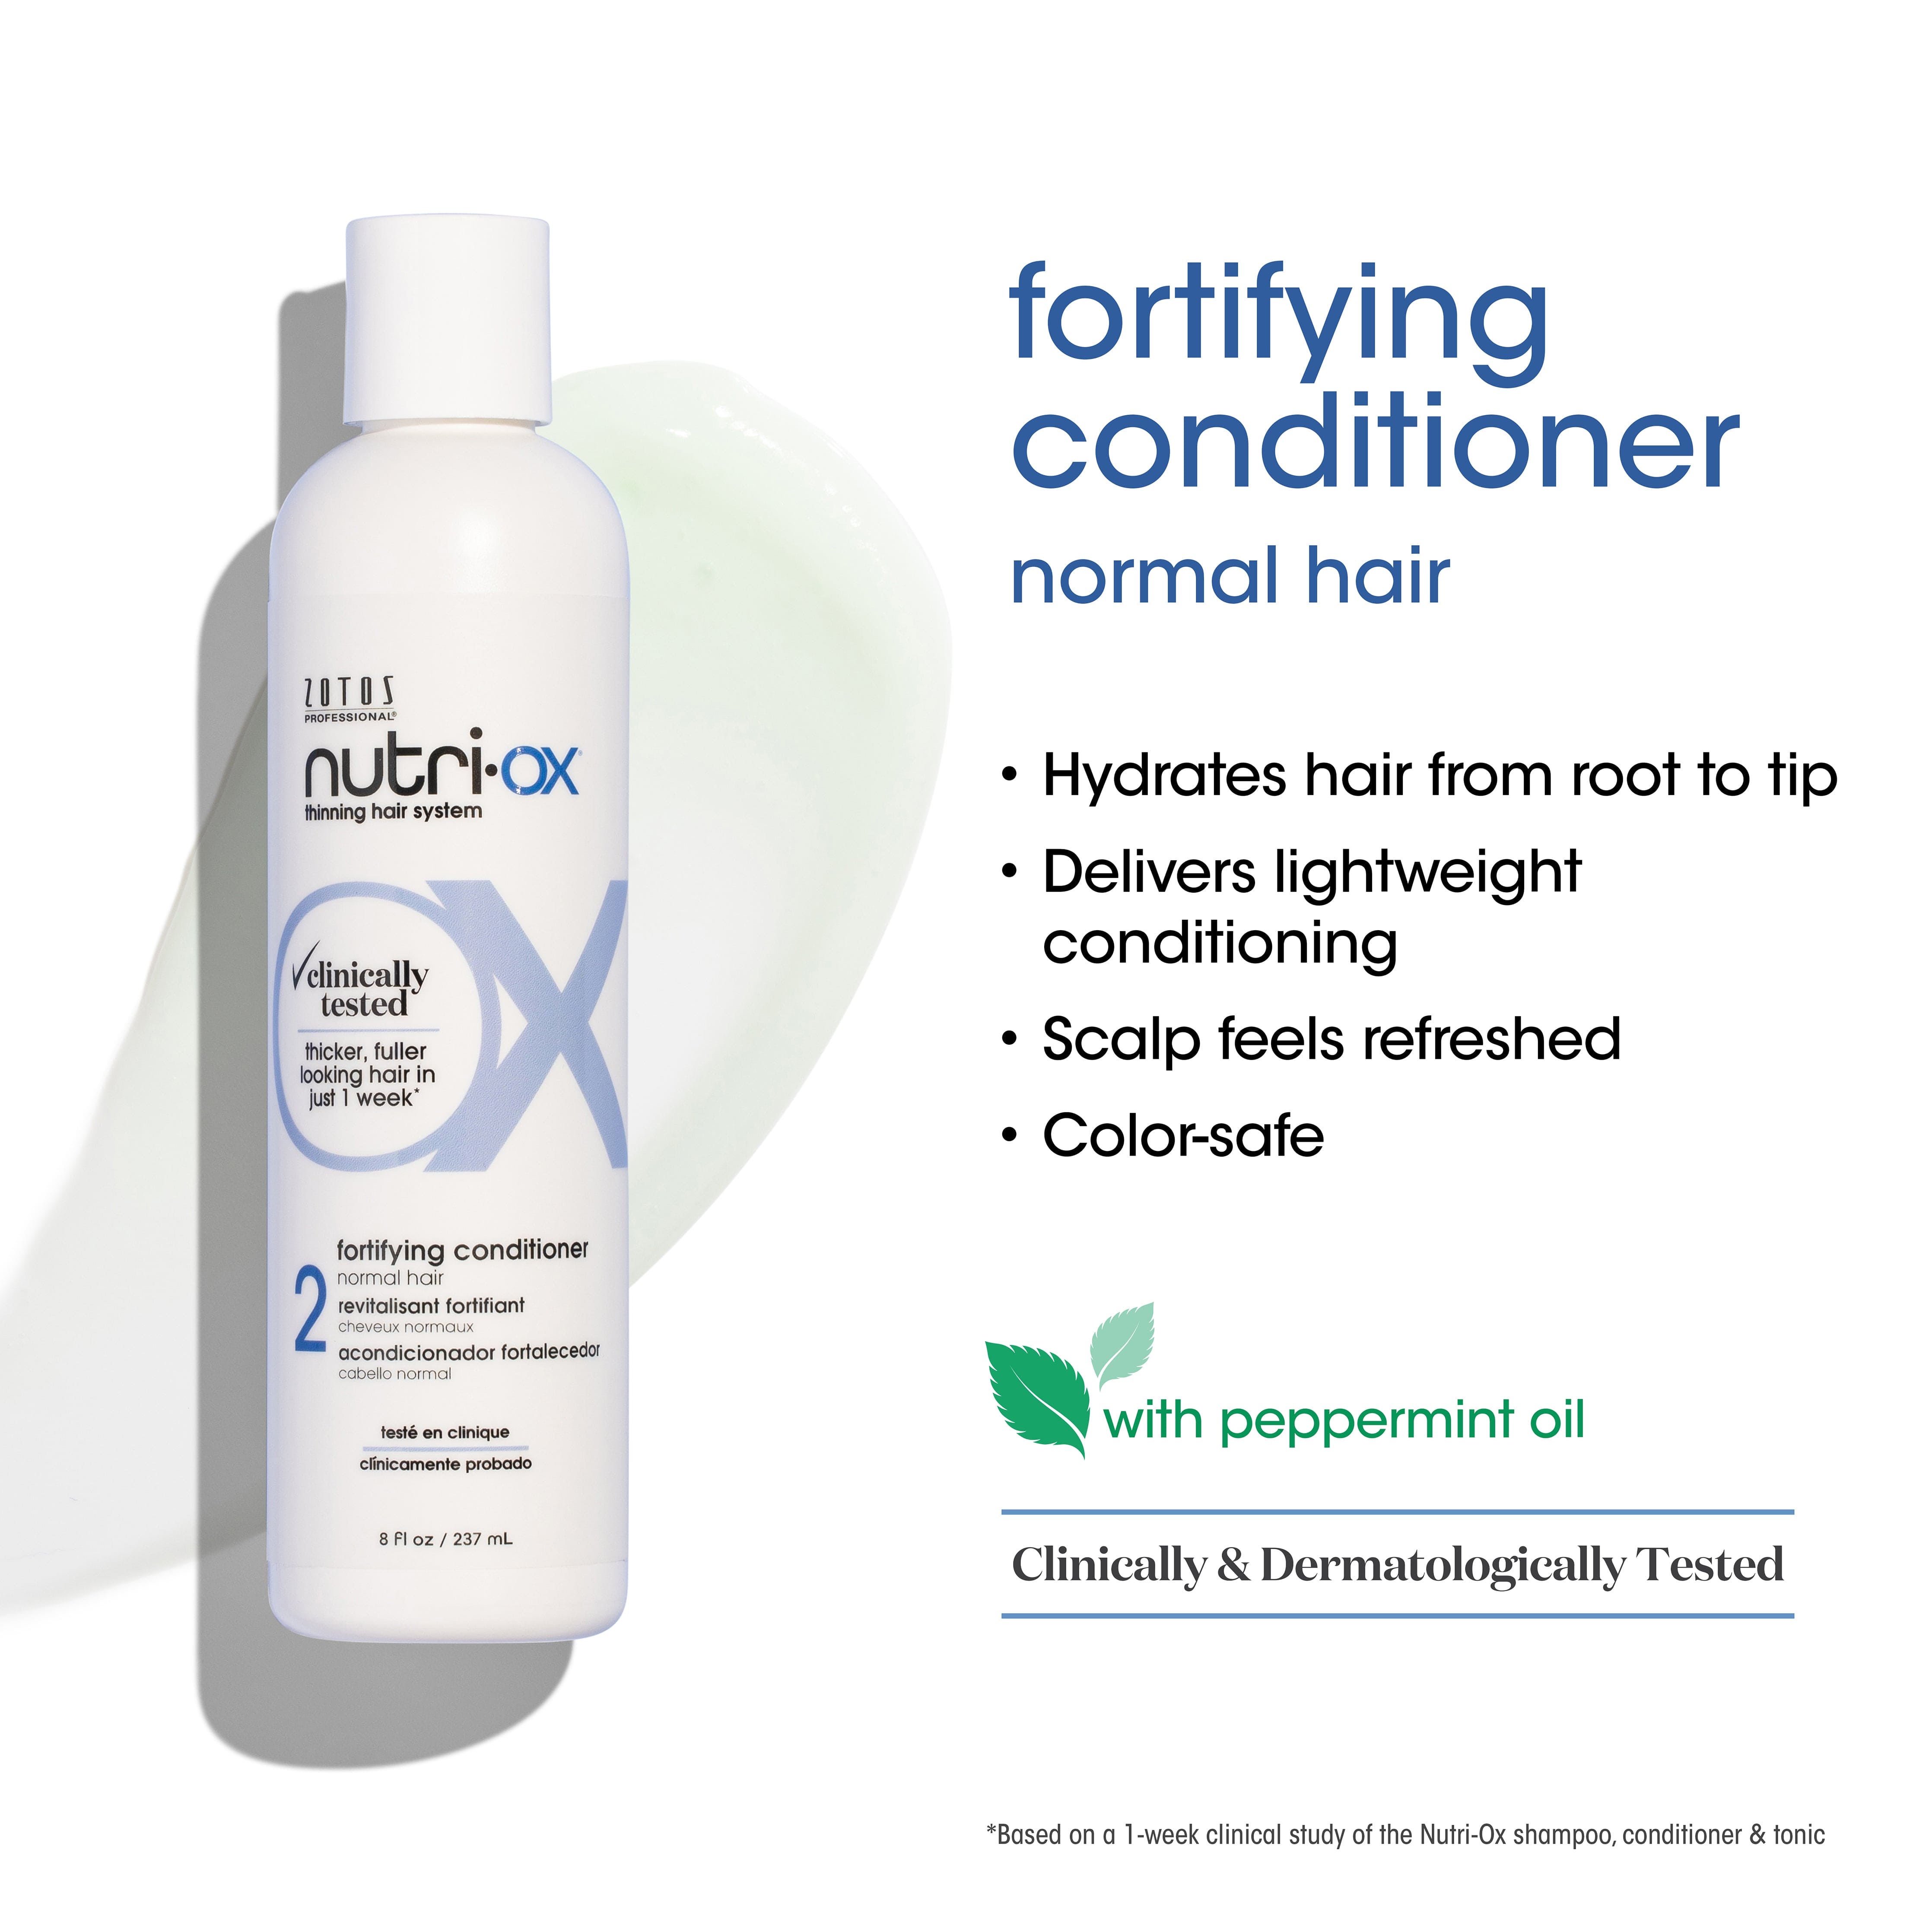 Fortifying conditioner for normal hair. It hydrates hair from root to tip, delivers lightweight conditioning, scalp feels refreshed, color-safe.